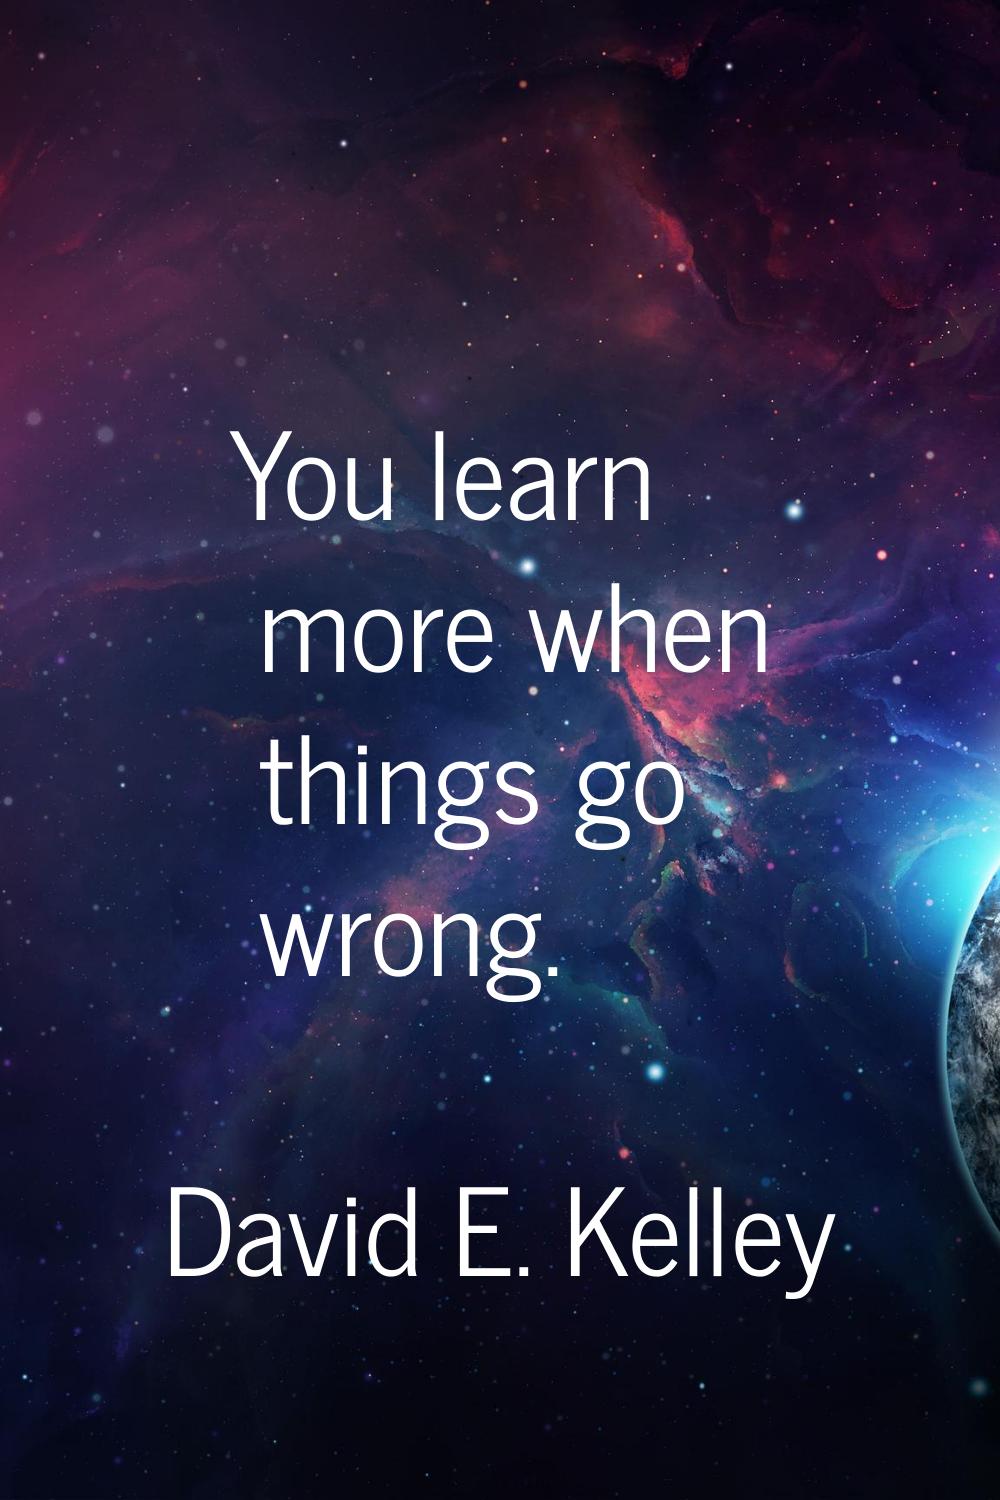 You learn more when things go wrong.